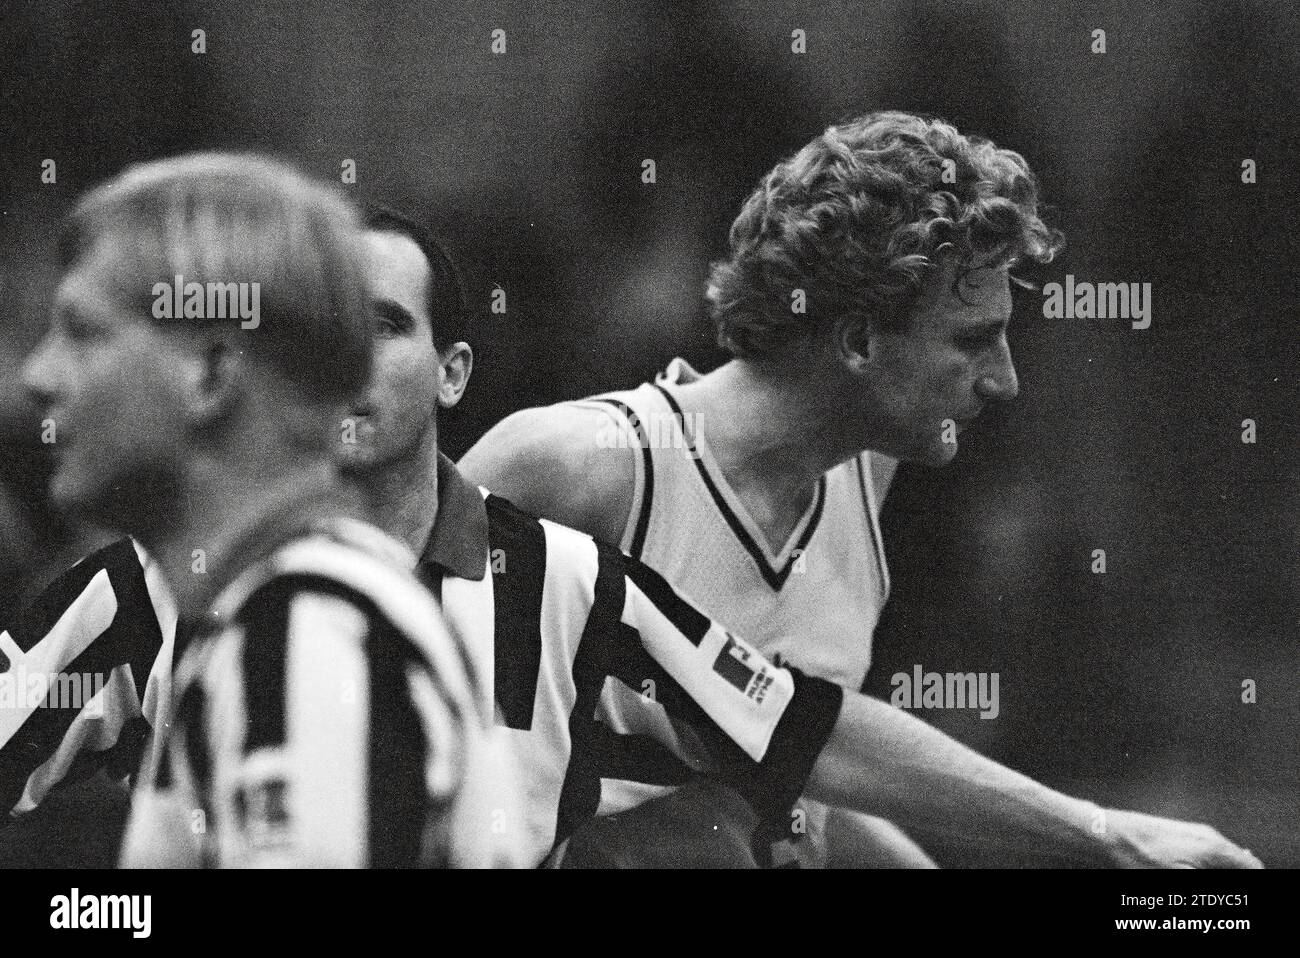 Basketball: Akrides - Goba, IJmuiden, The Netherlands, 18-03-1994, Whizgle News from the Past, Tailored for the Future. Explore historical narratives, Dutch The Netherlands agency image with a modern perspective, bridging the gap between yesterday's events and tomorrow's insights. A timeless journey shaping the stories that shape our future. Stock Photo